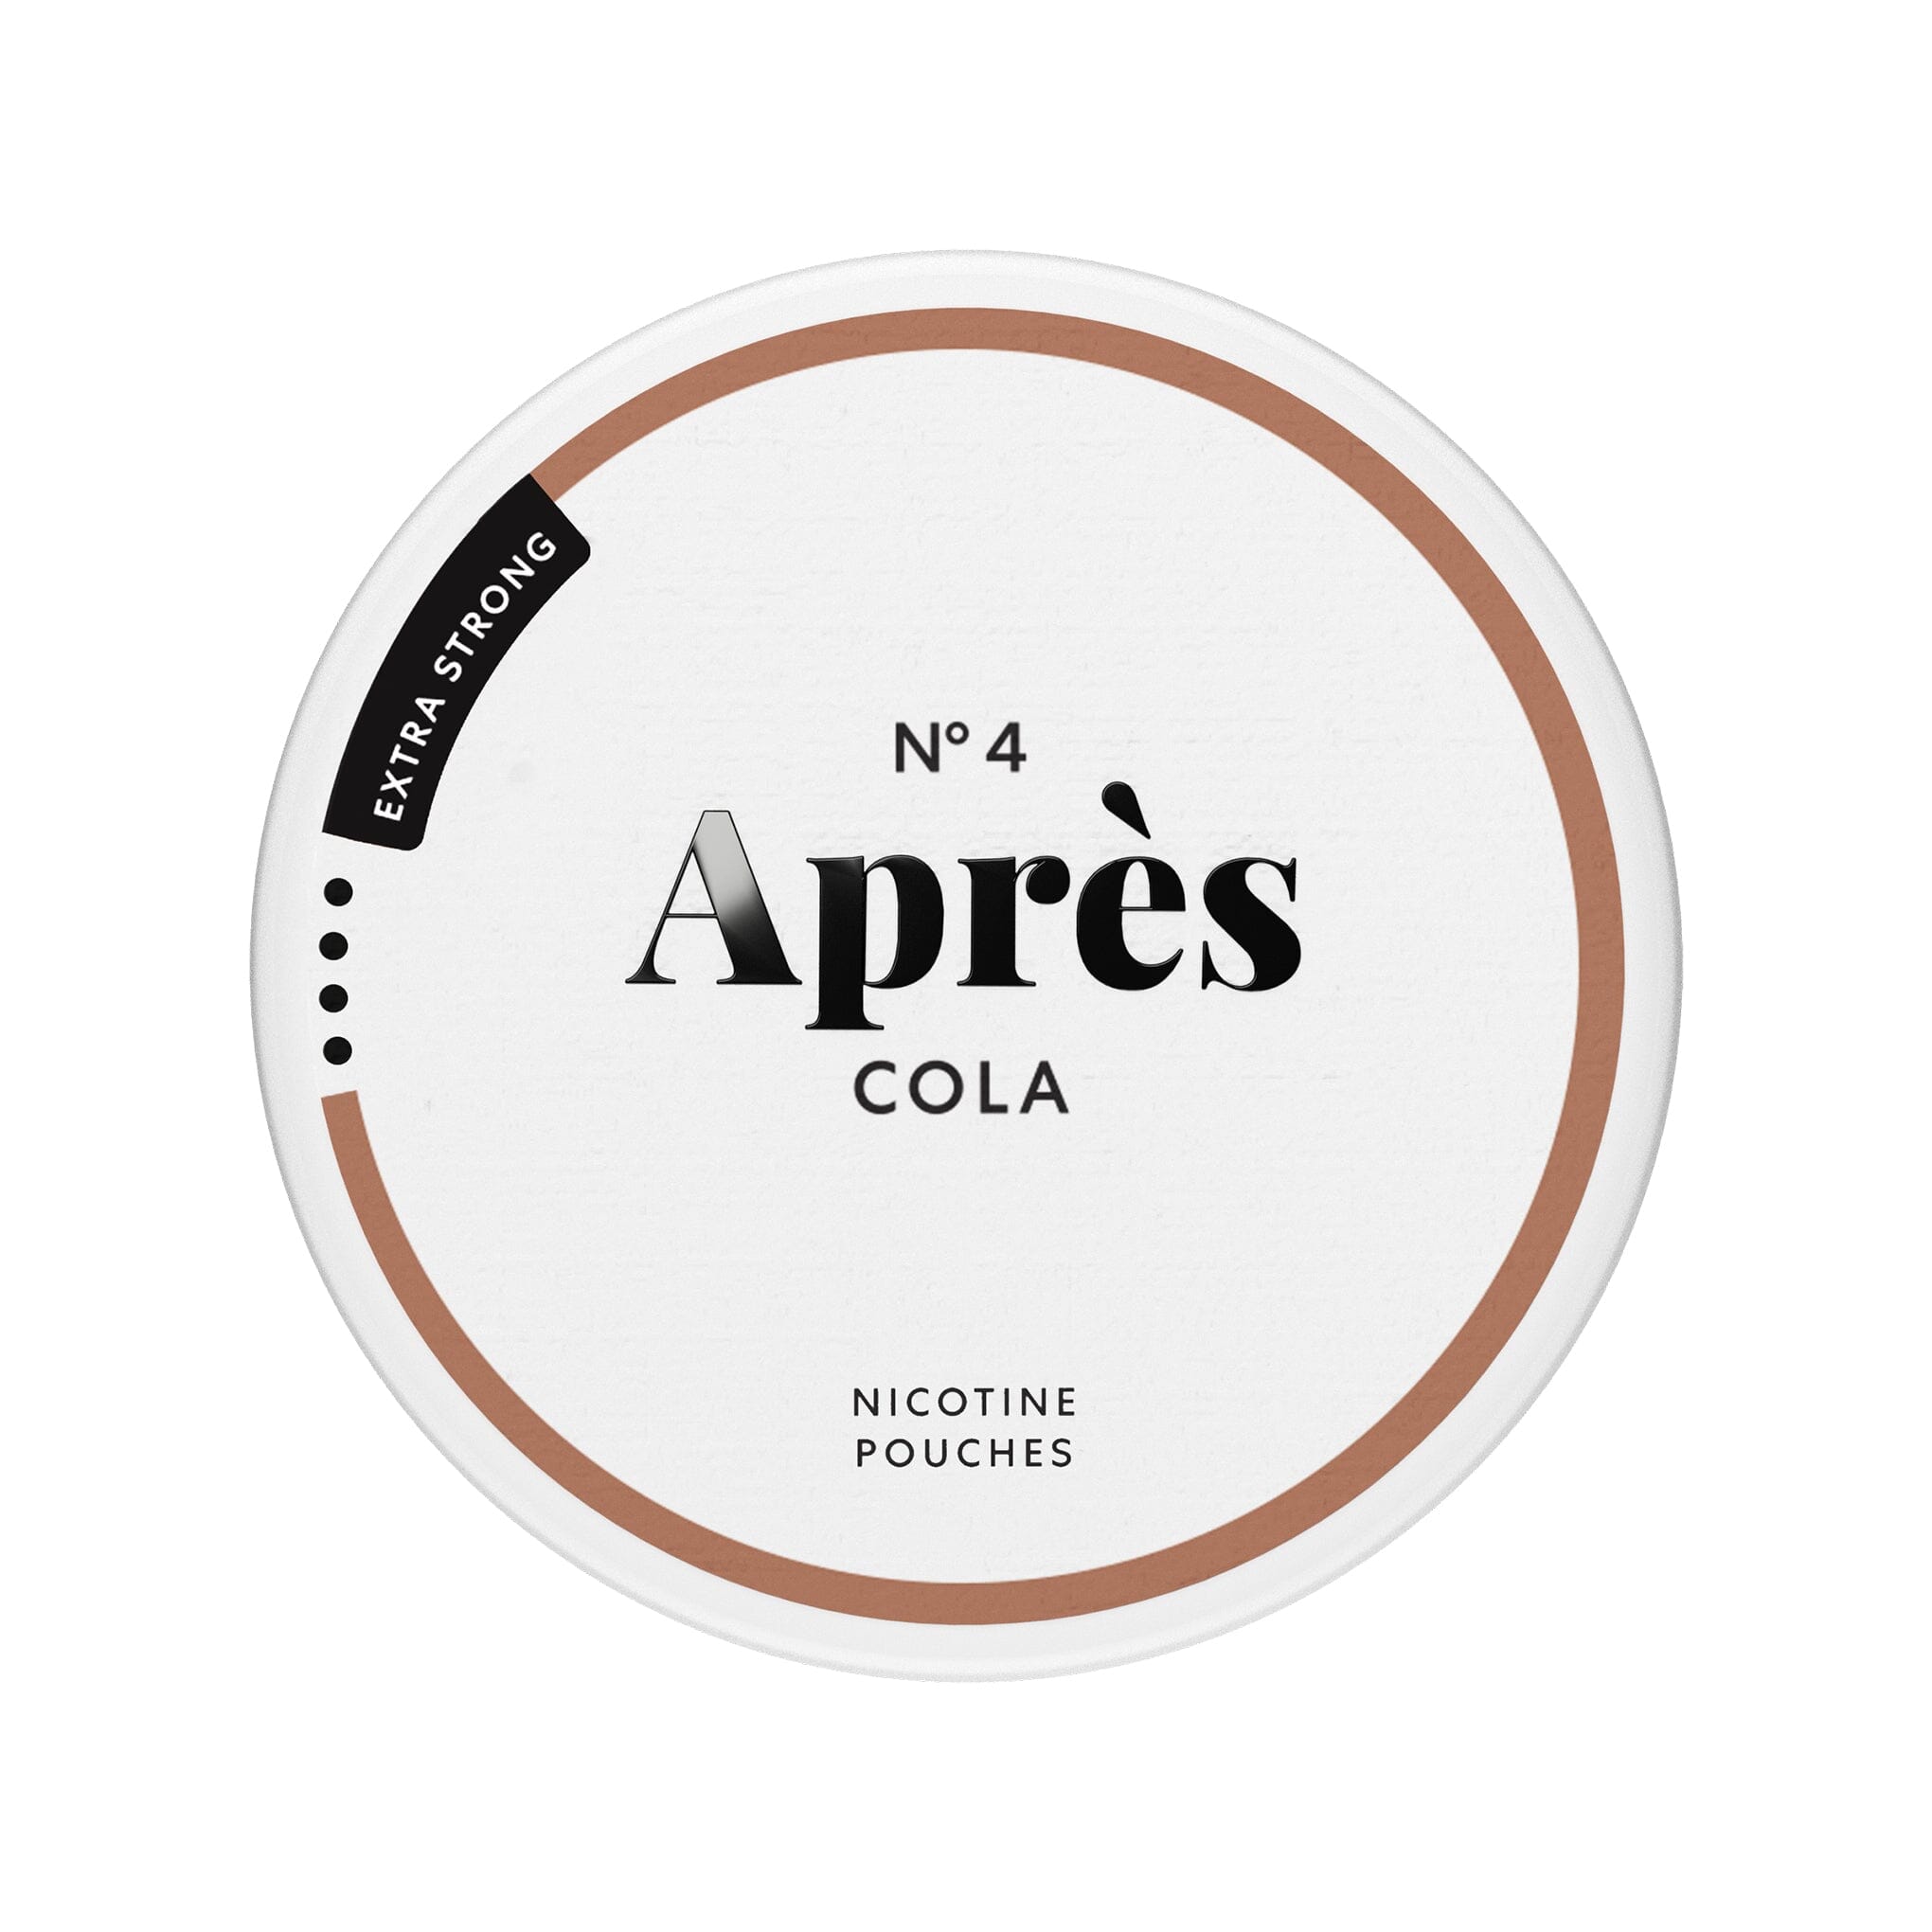 Après Nicotine Pouches Cola Extra Strong - 15MG/G 